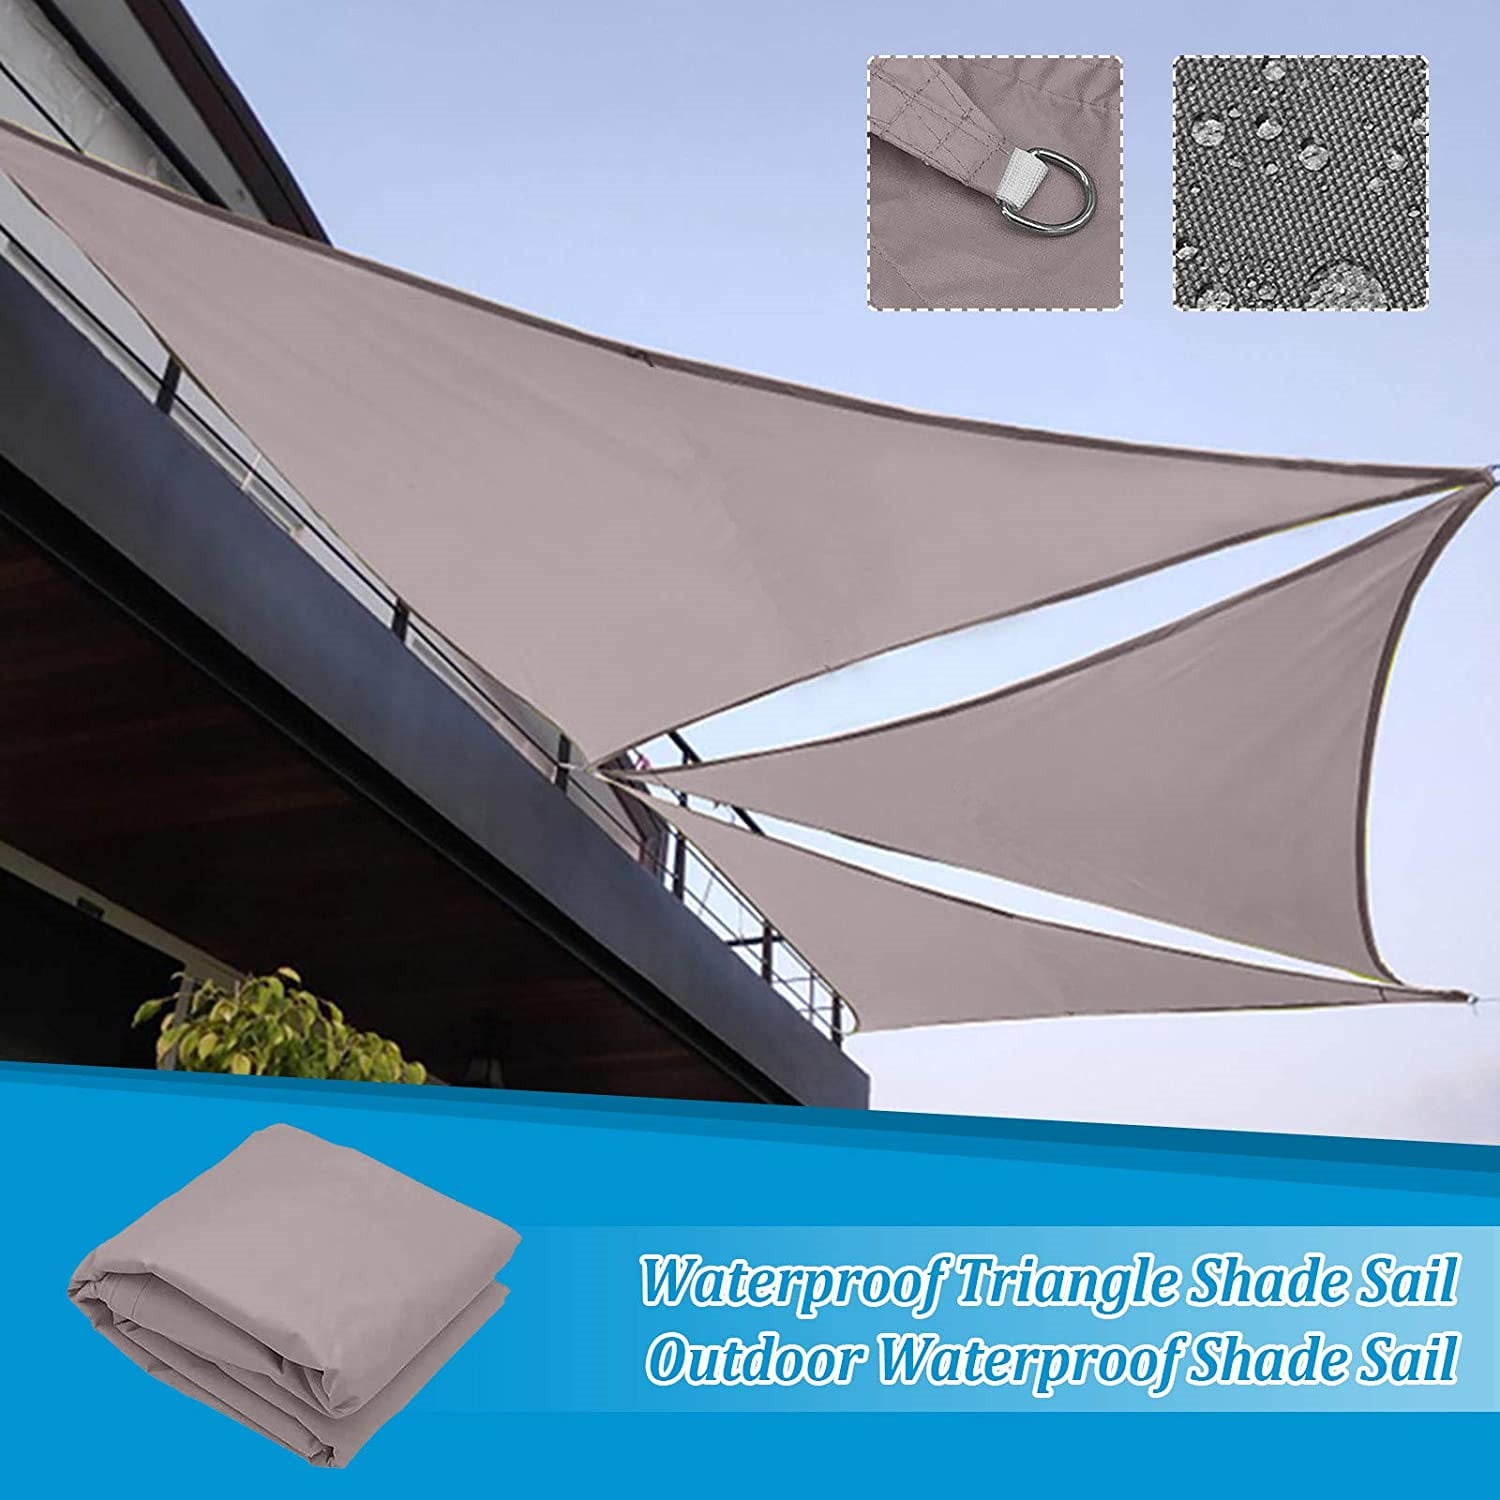 Details about   16Ft Sun Shade Sail 97% UV Block Triangle Canopy Outdoor Patio Pool Rice White 